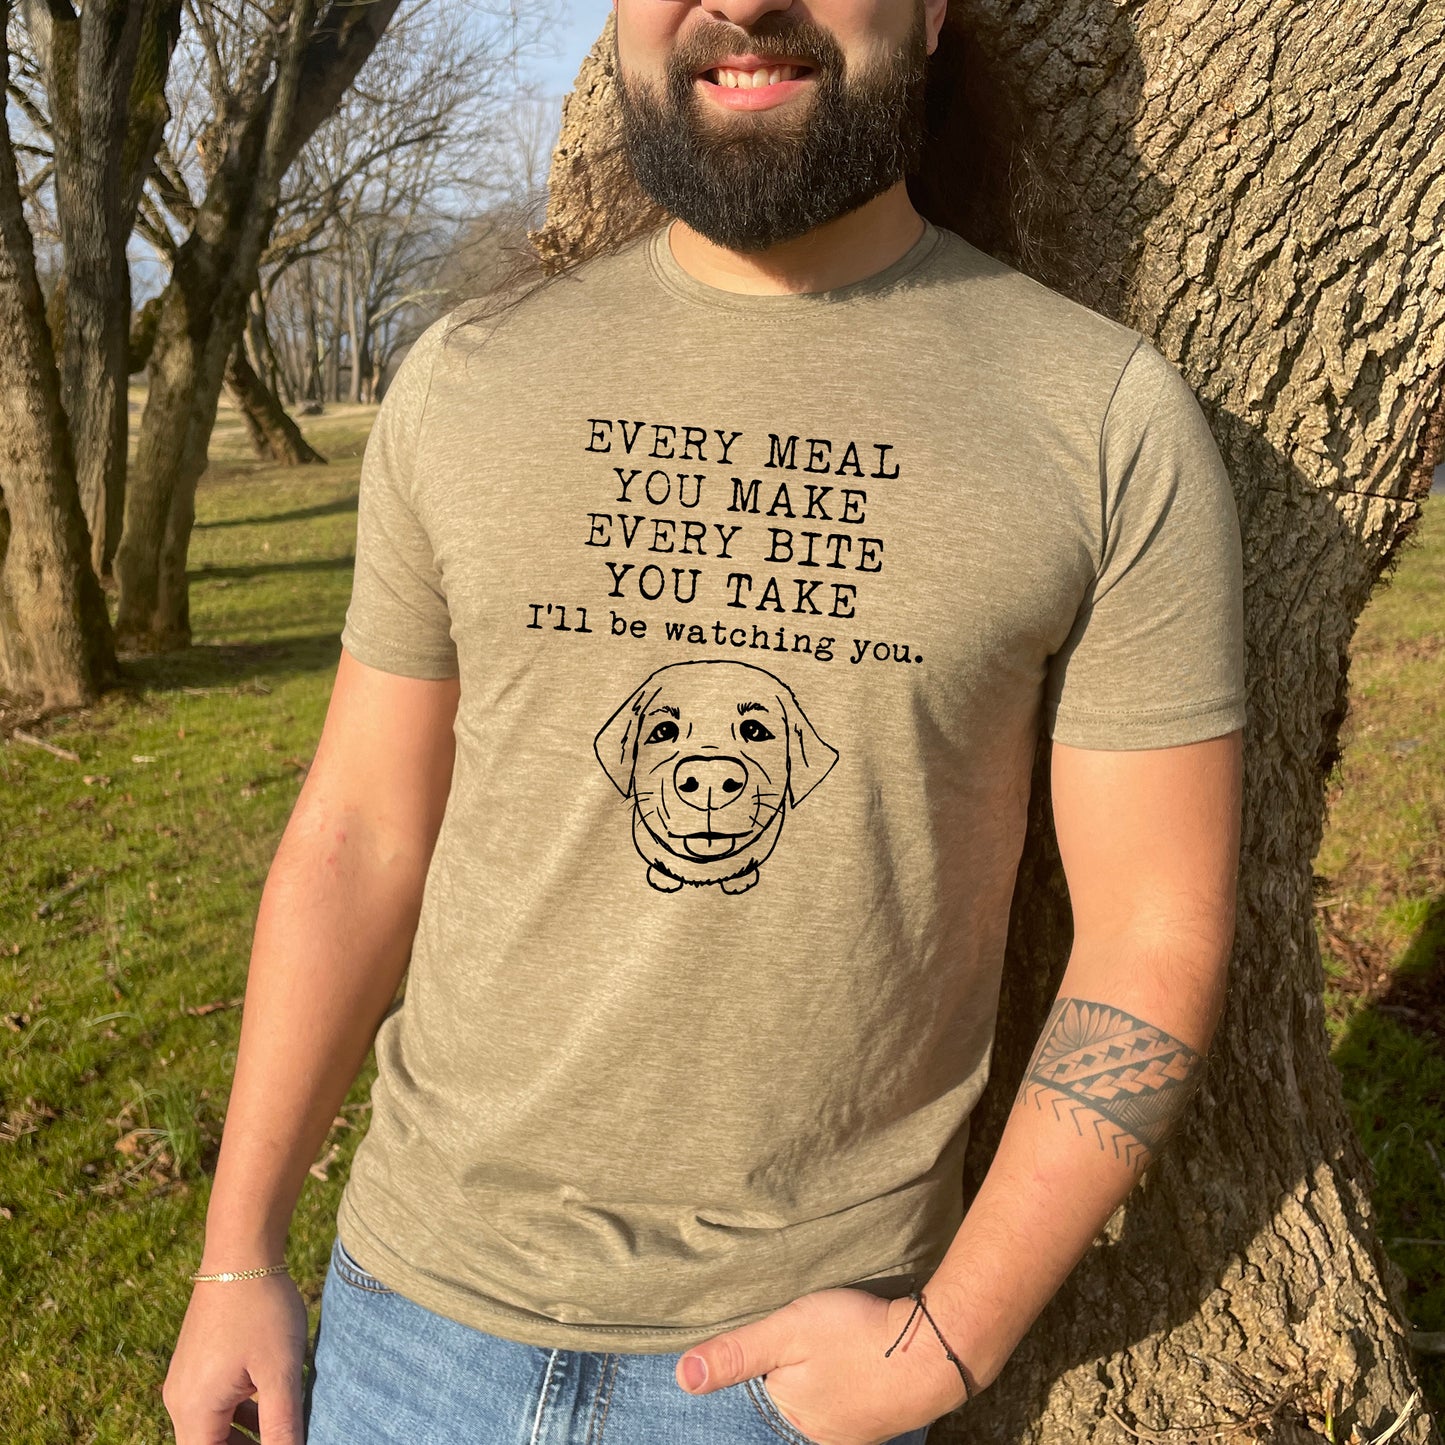 Every Meal You Make, Every Bite You Take, I'll Be Watching You - Men's / Unisex Tee - Sage or Stonewash Blue